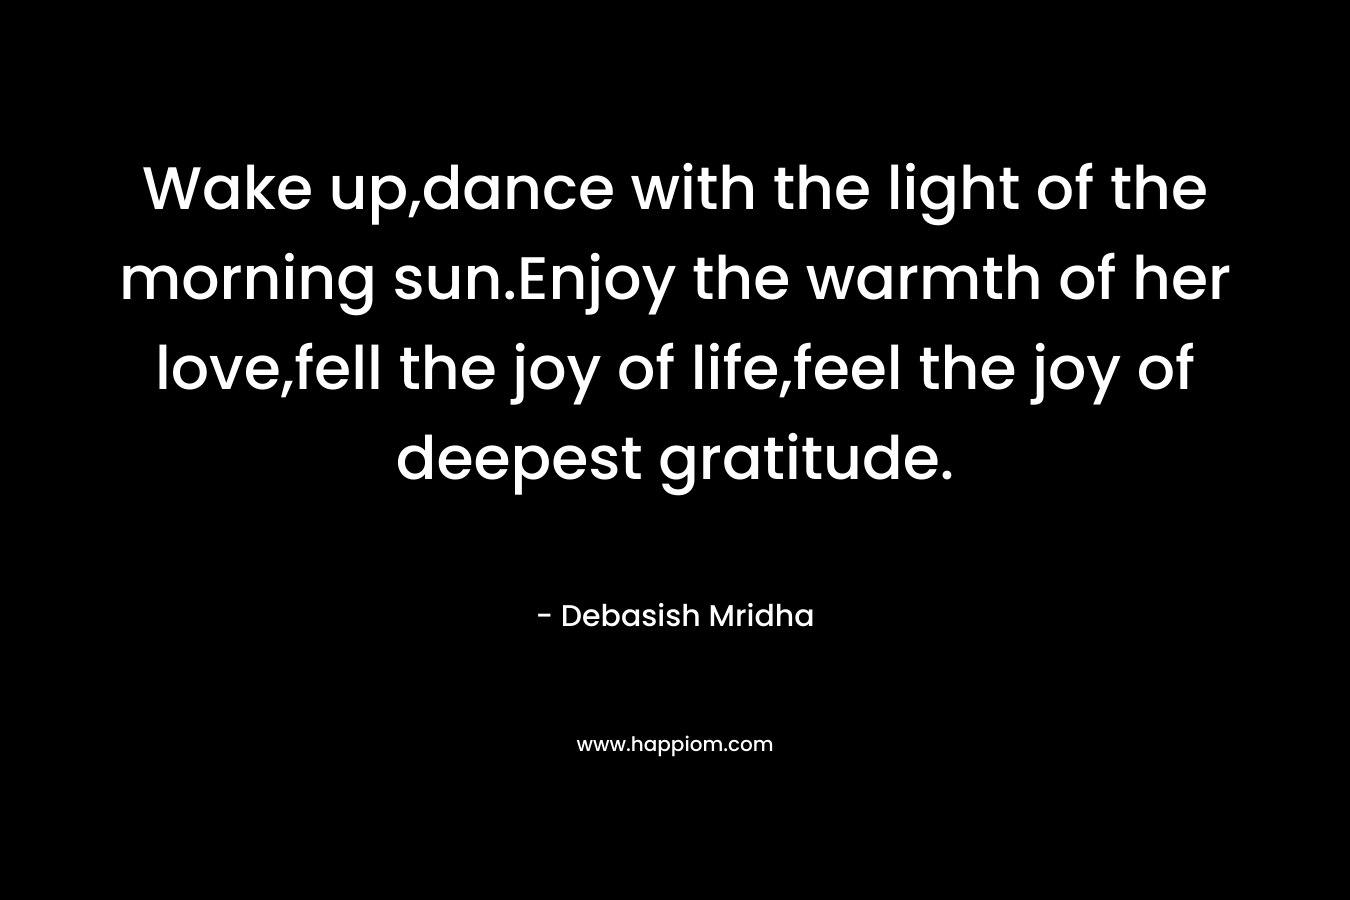 Wake up,dance with the light of the morning sun.Enjoy the warmth of her love,fell the joy of life,feel the joy of deepest gratitude.